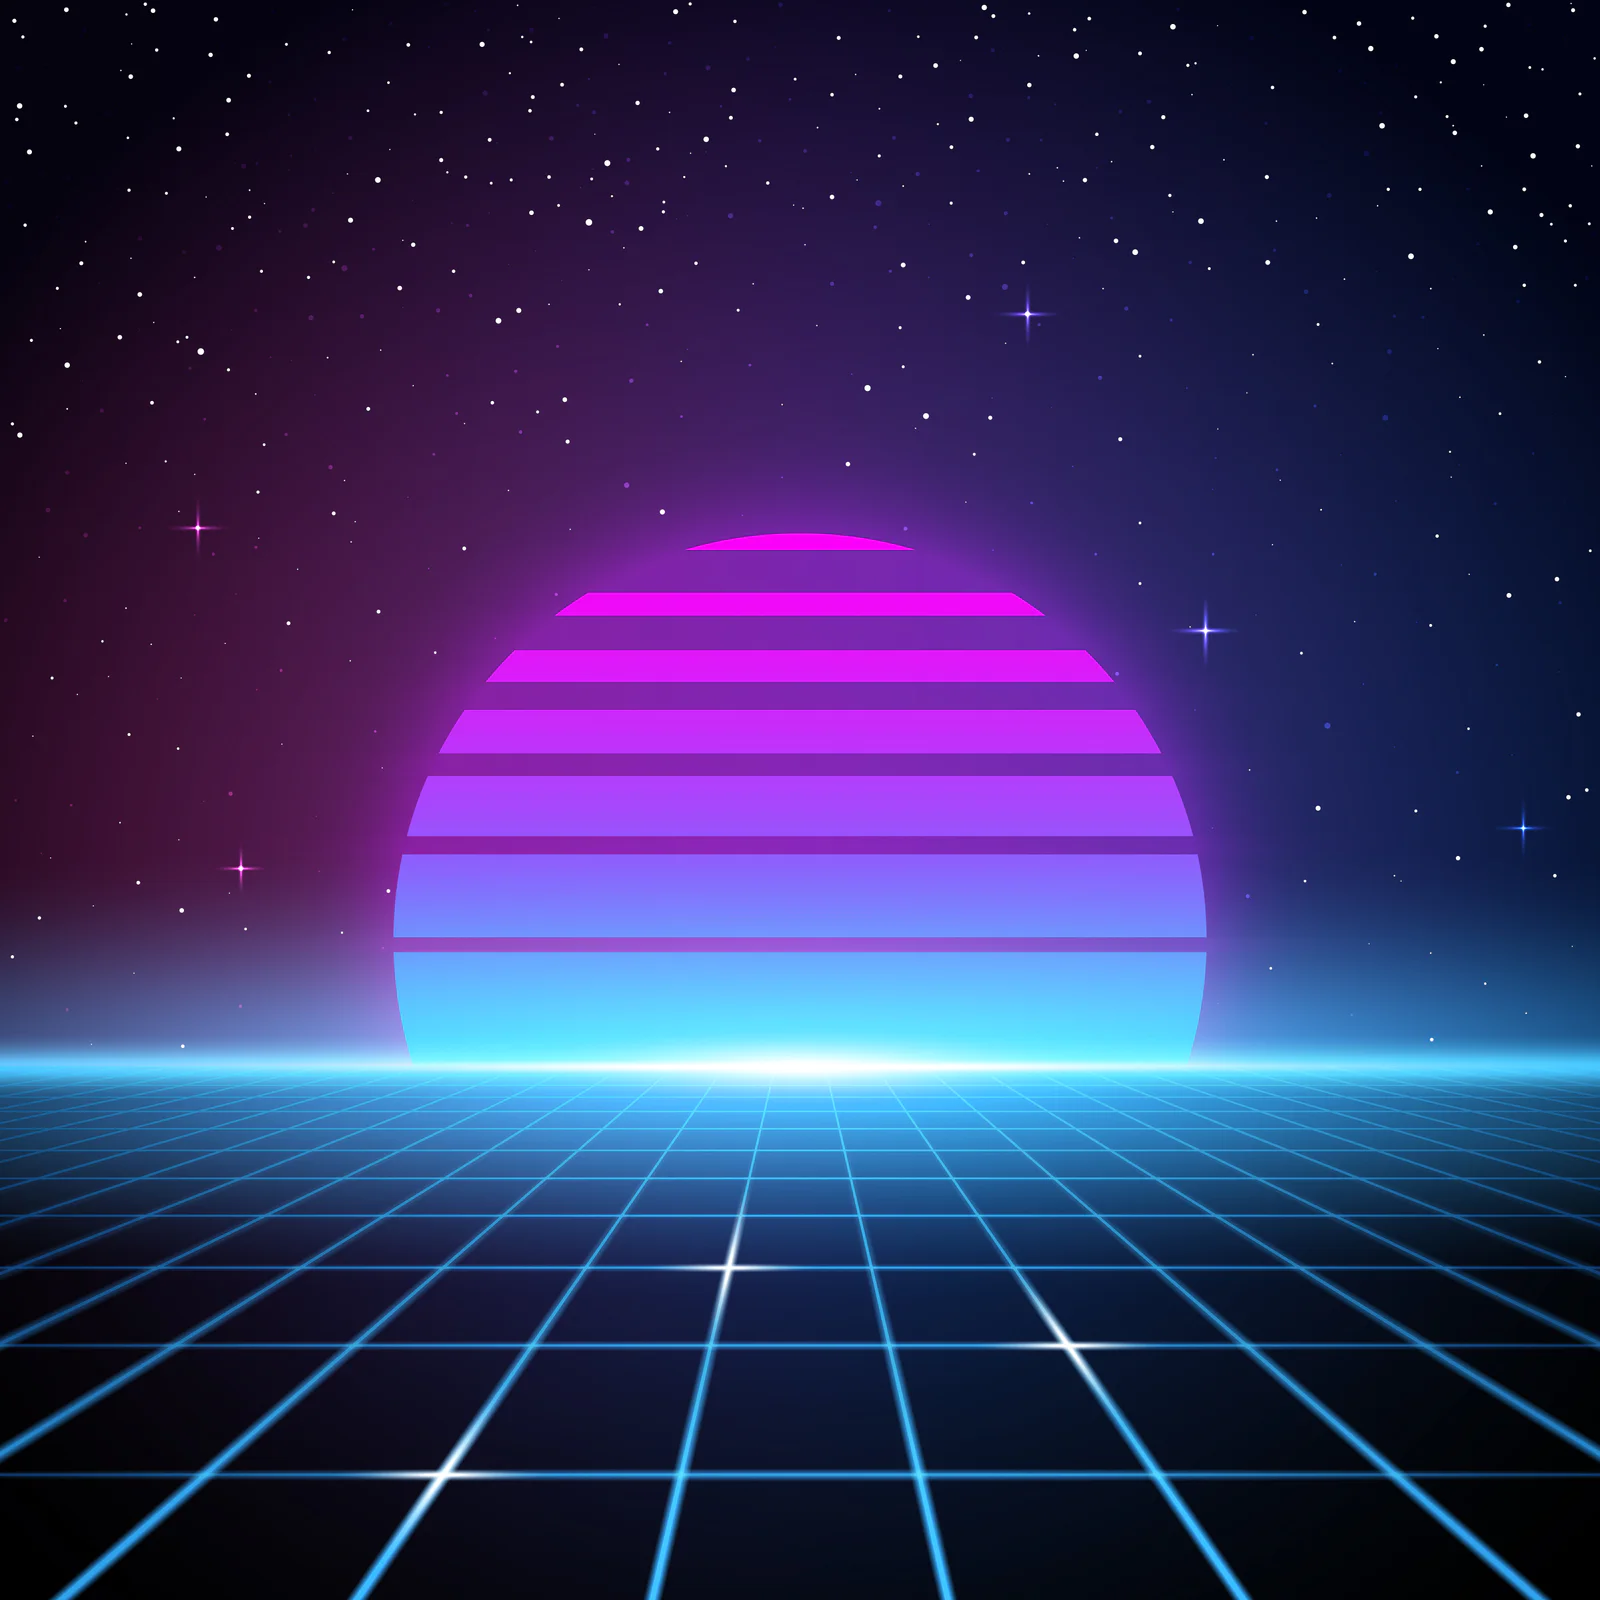 A retro-futuristic style background, emulating science fiction movies from the 1980s. Glowing grid lines flow up towards a retro striped sun or planet looming on the horizon beneath the stars and night sky. With the current revival of 80s design styles, this is an ideal design element for your 80s themed party, poster or design project. All elements of this vector illustration are grouped onto clearly labelled layers within the EPS10 file making it easy for you to edit and customize to suit your needs.